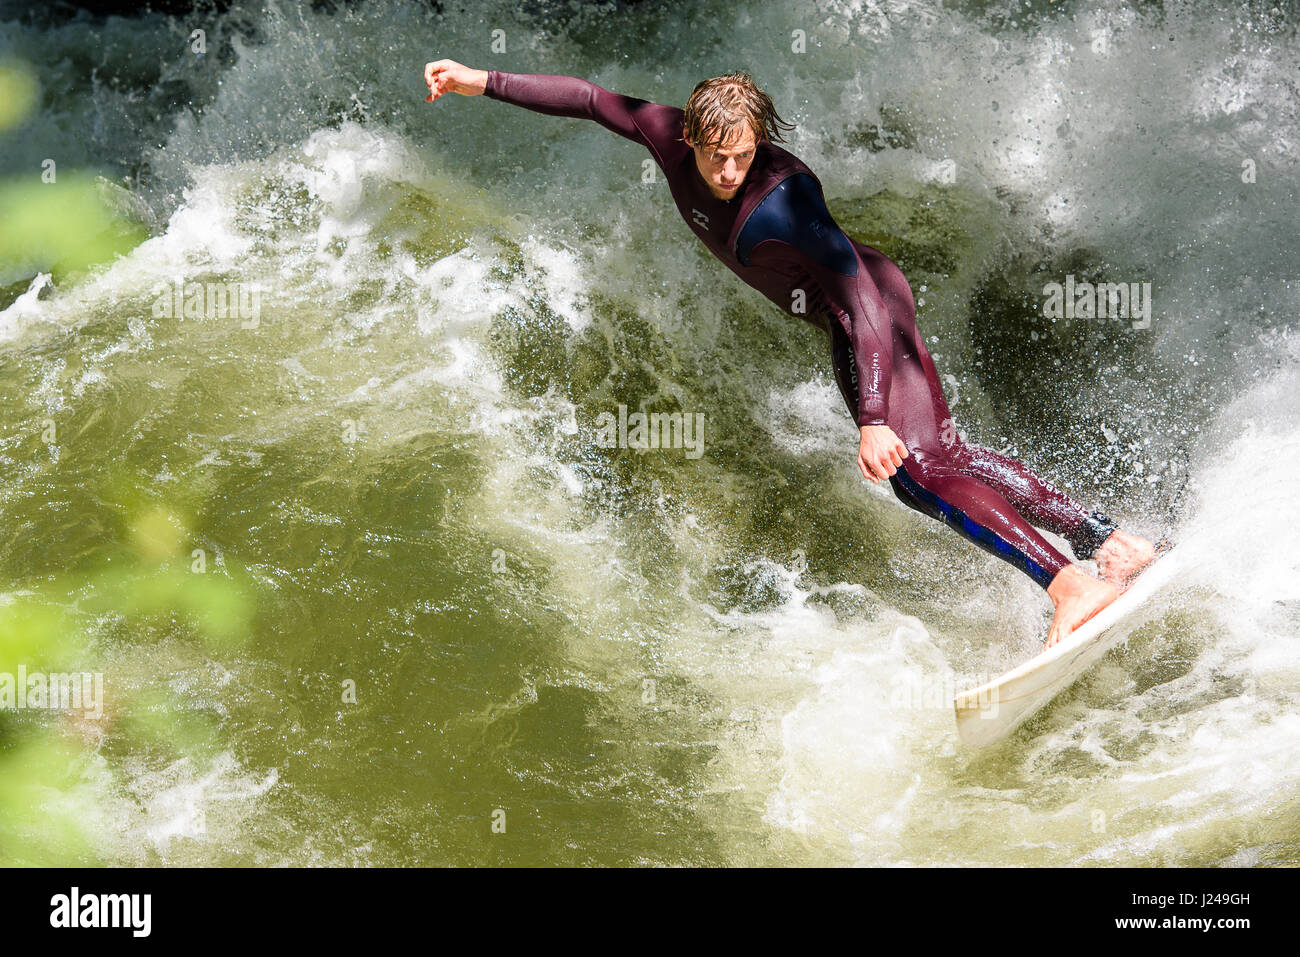 Munich, Germany. 24th Apr, 2017. A man surfs in the English Garden in Munich, Germany, 24 April 2017. Photo: Florian Eckl/dpa/Alamy Live News Stock Photo